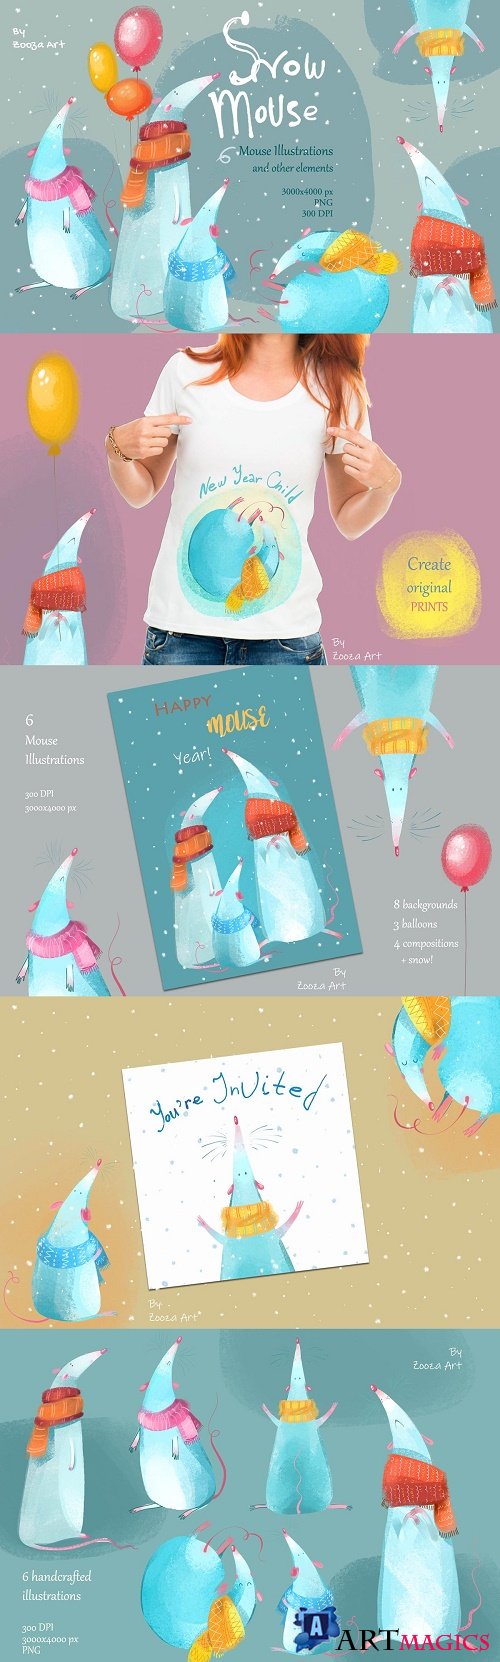 Snow Mouse cozy illustrations - 4244583